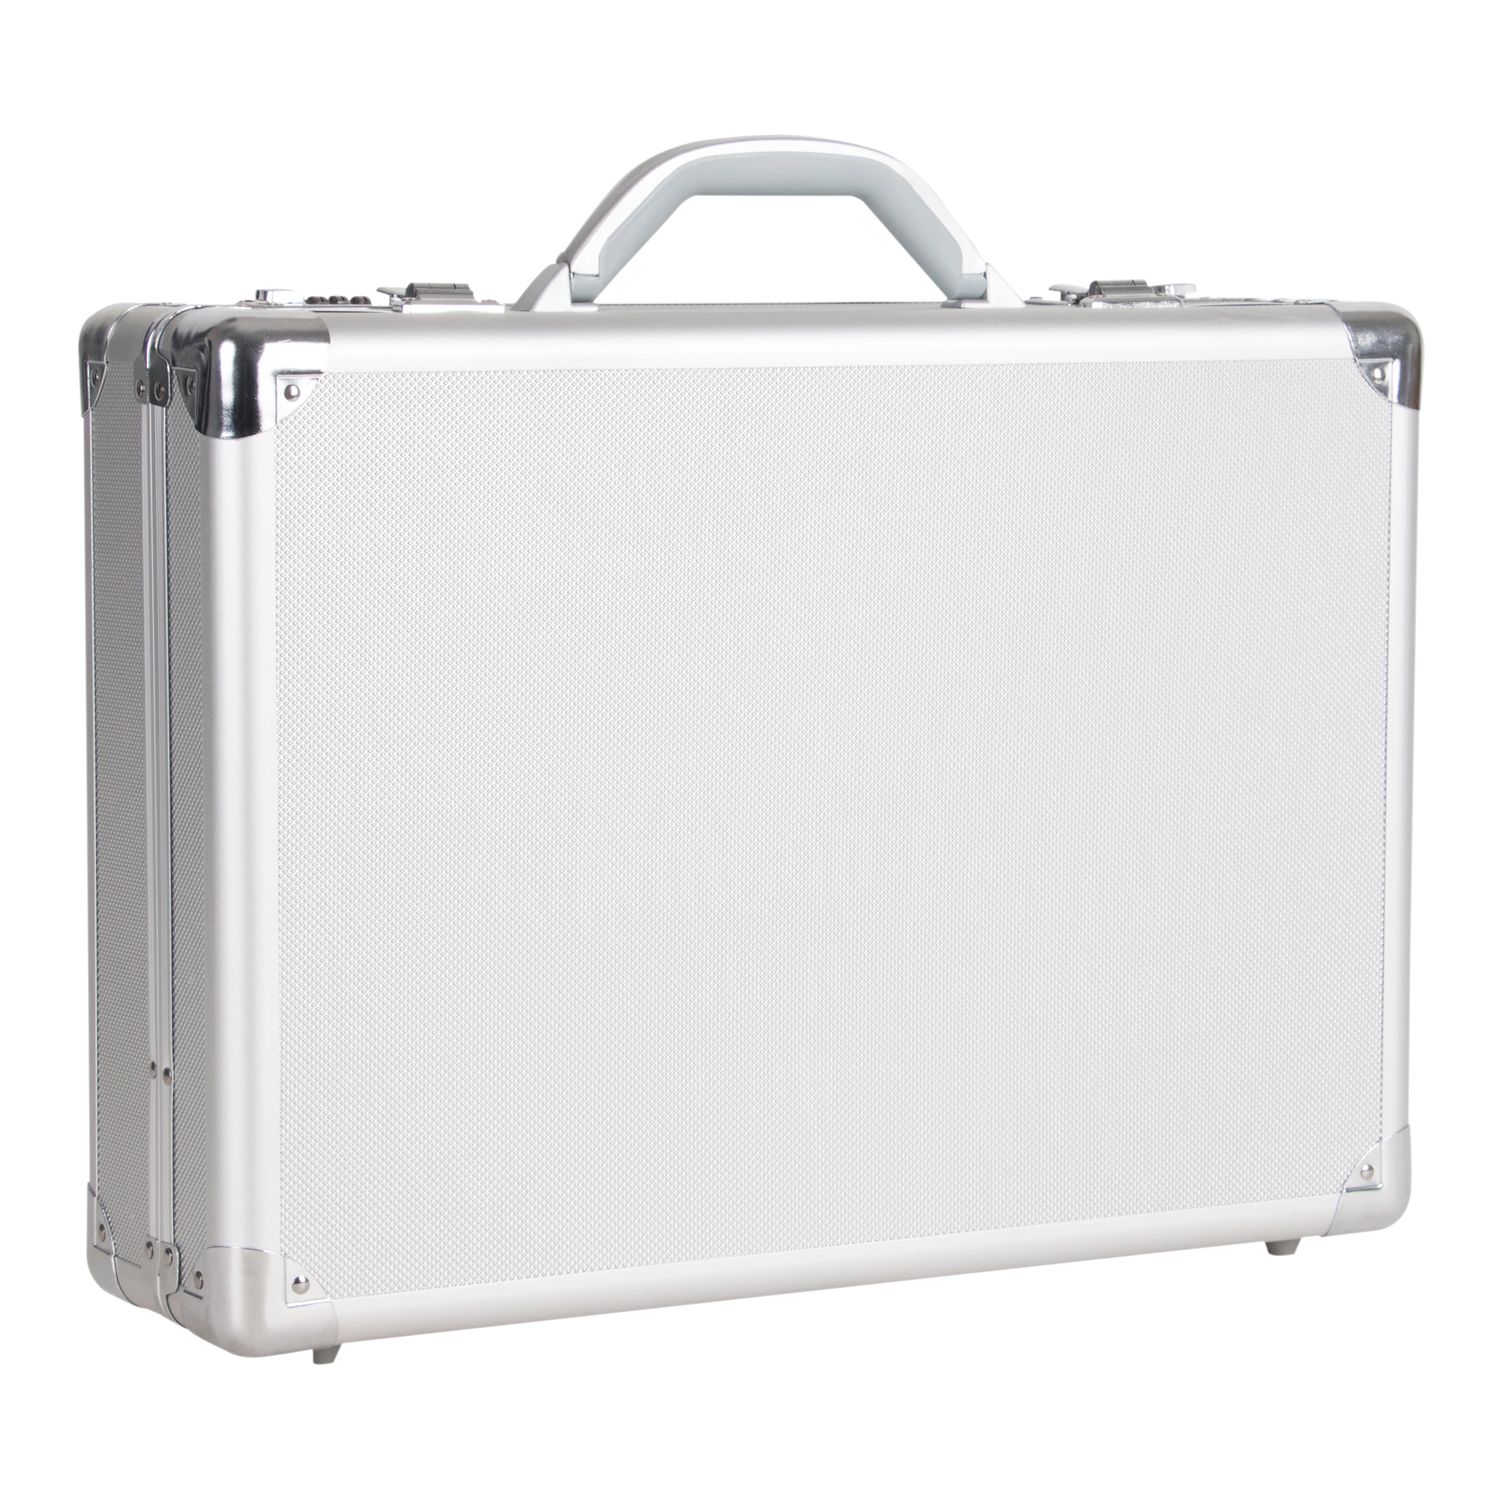 Image for Heritage Aluminum 17.3" Computer Attaché Case at Kohl's.